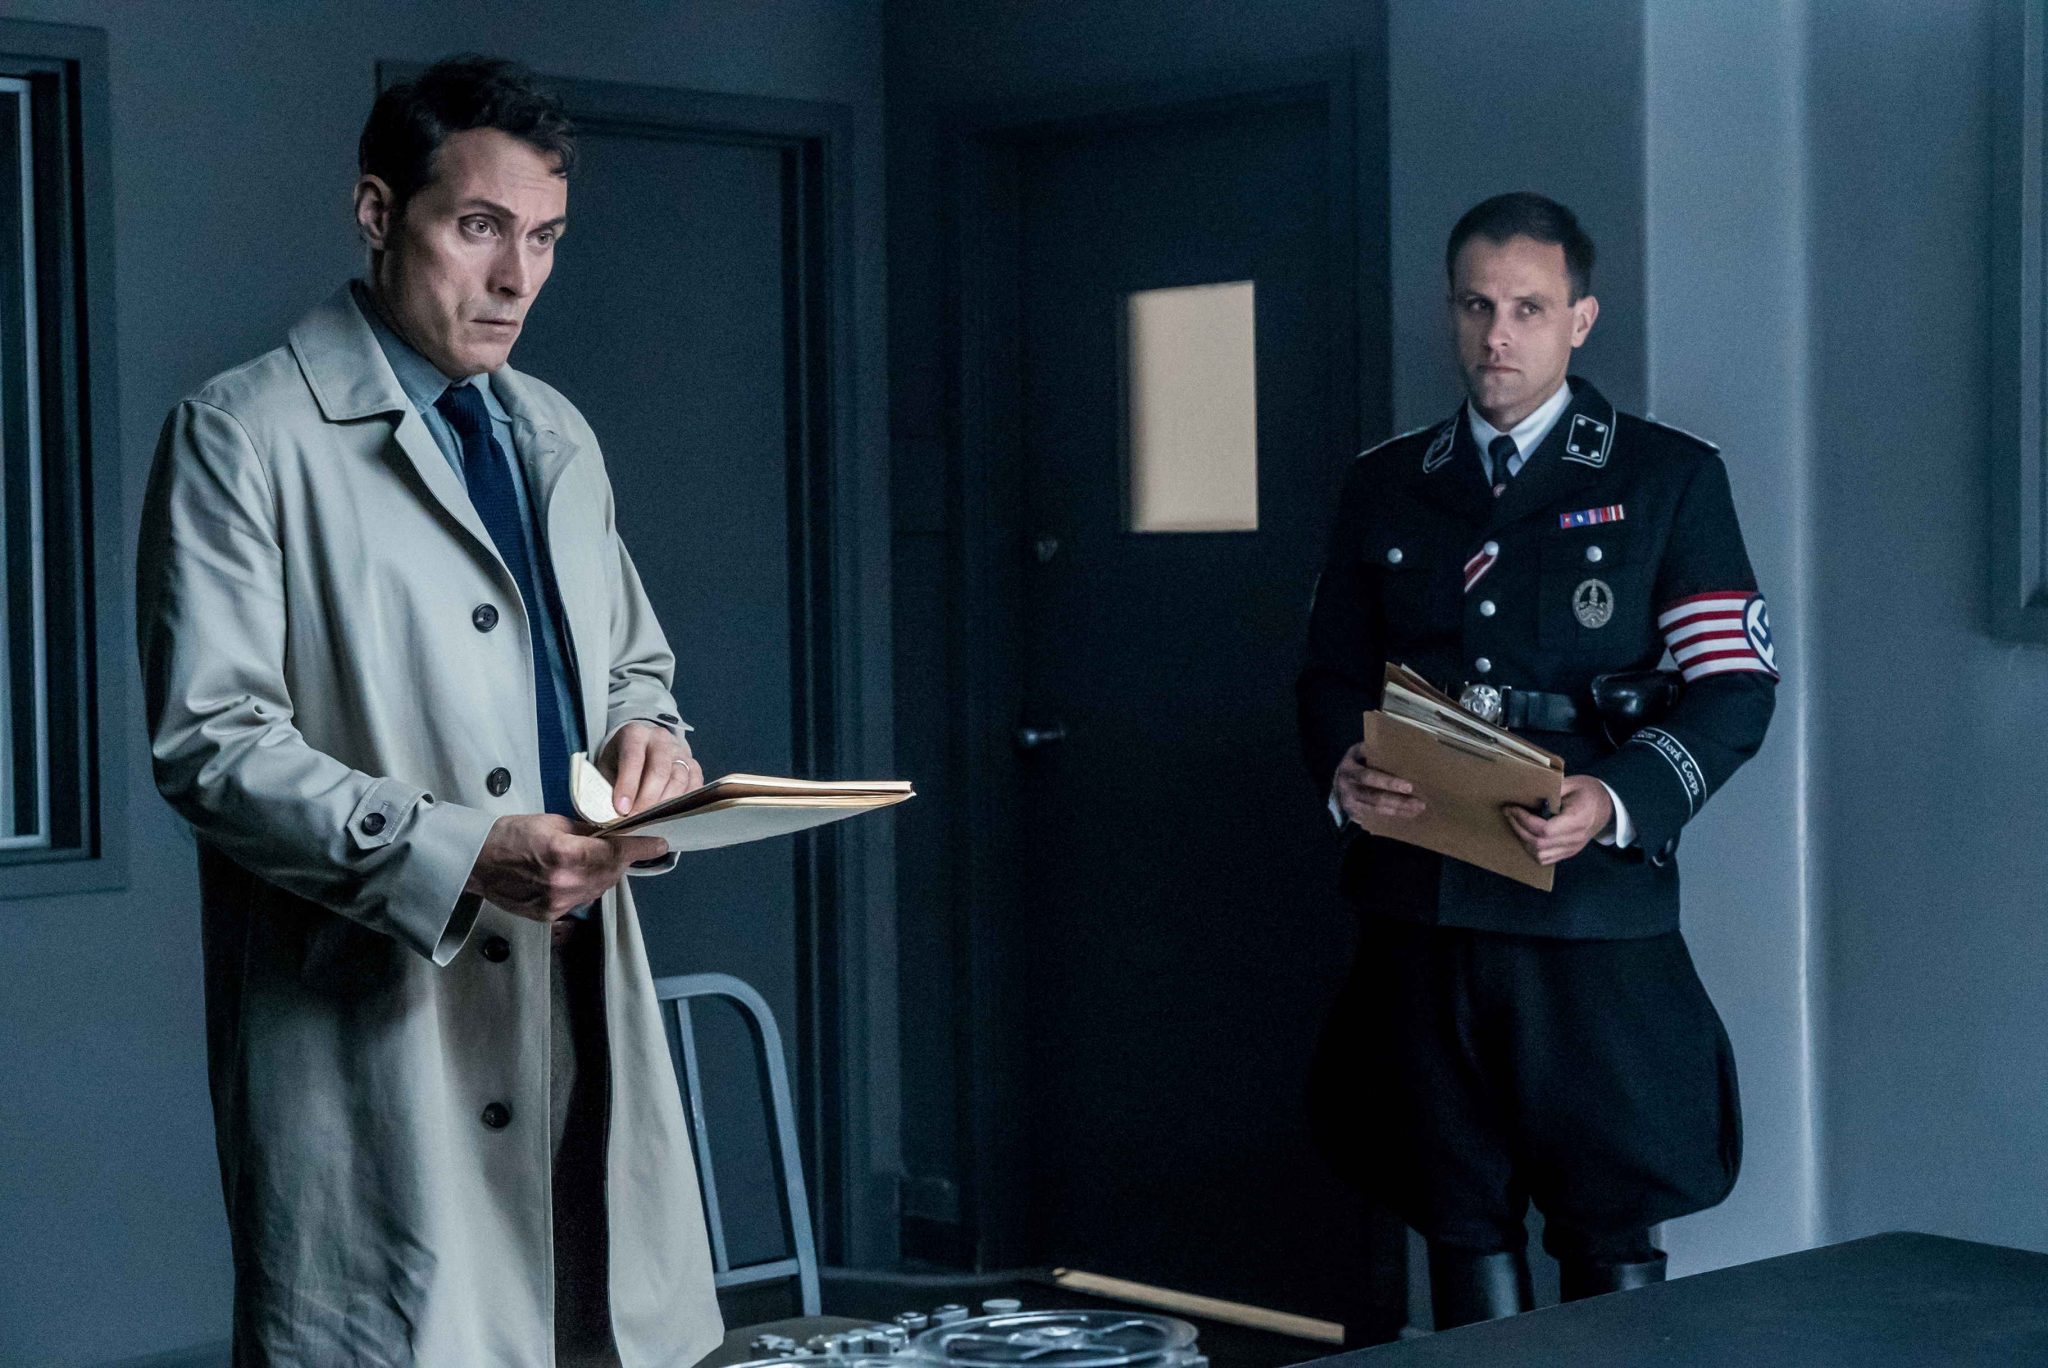 Rufus Sewell (l) as Obergruppenführer John Smith in The Man in the High Castle: Season 2. Photo Credit: Liane Hentscher/Amazon Prime Video